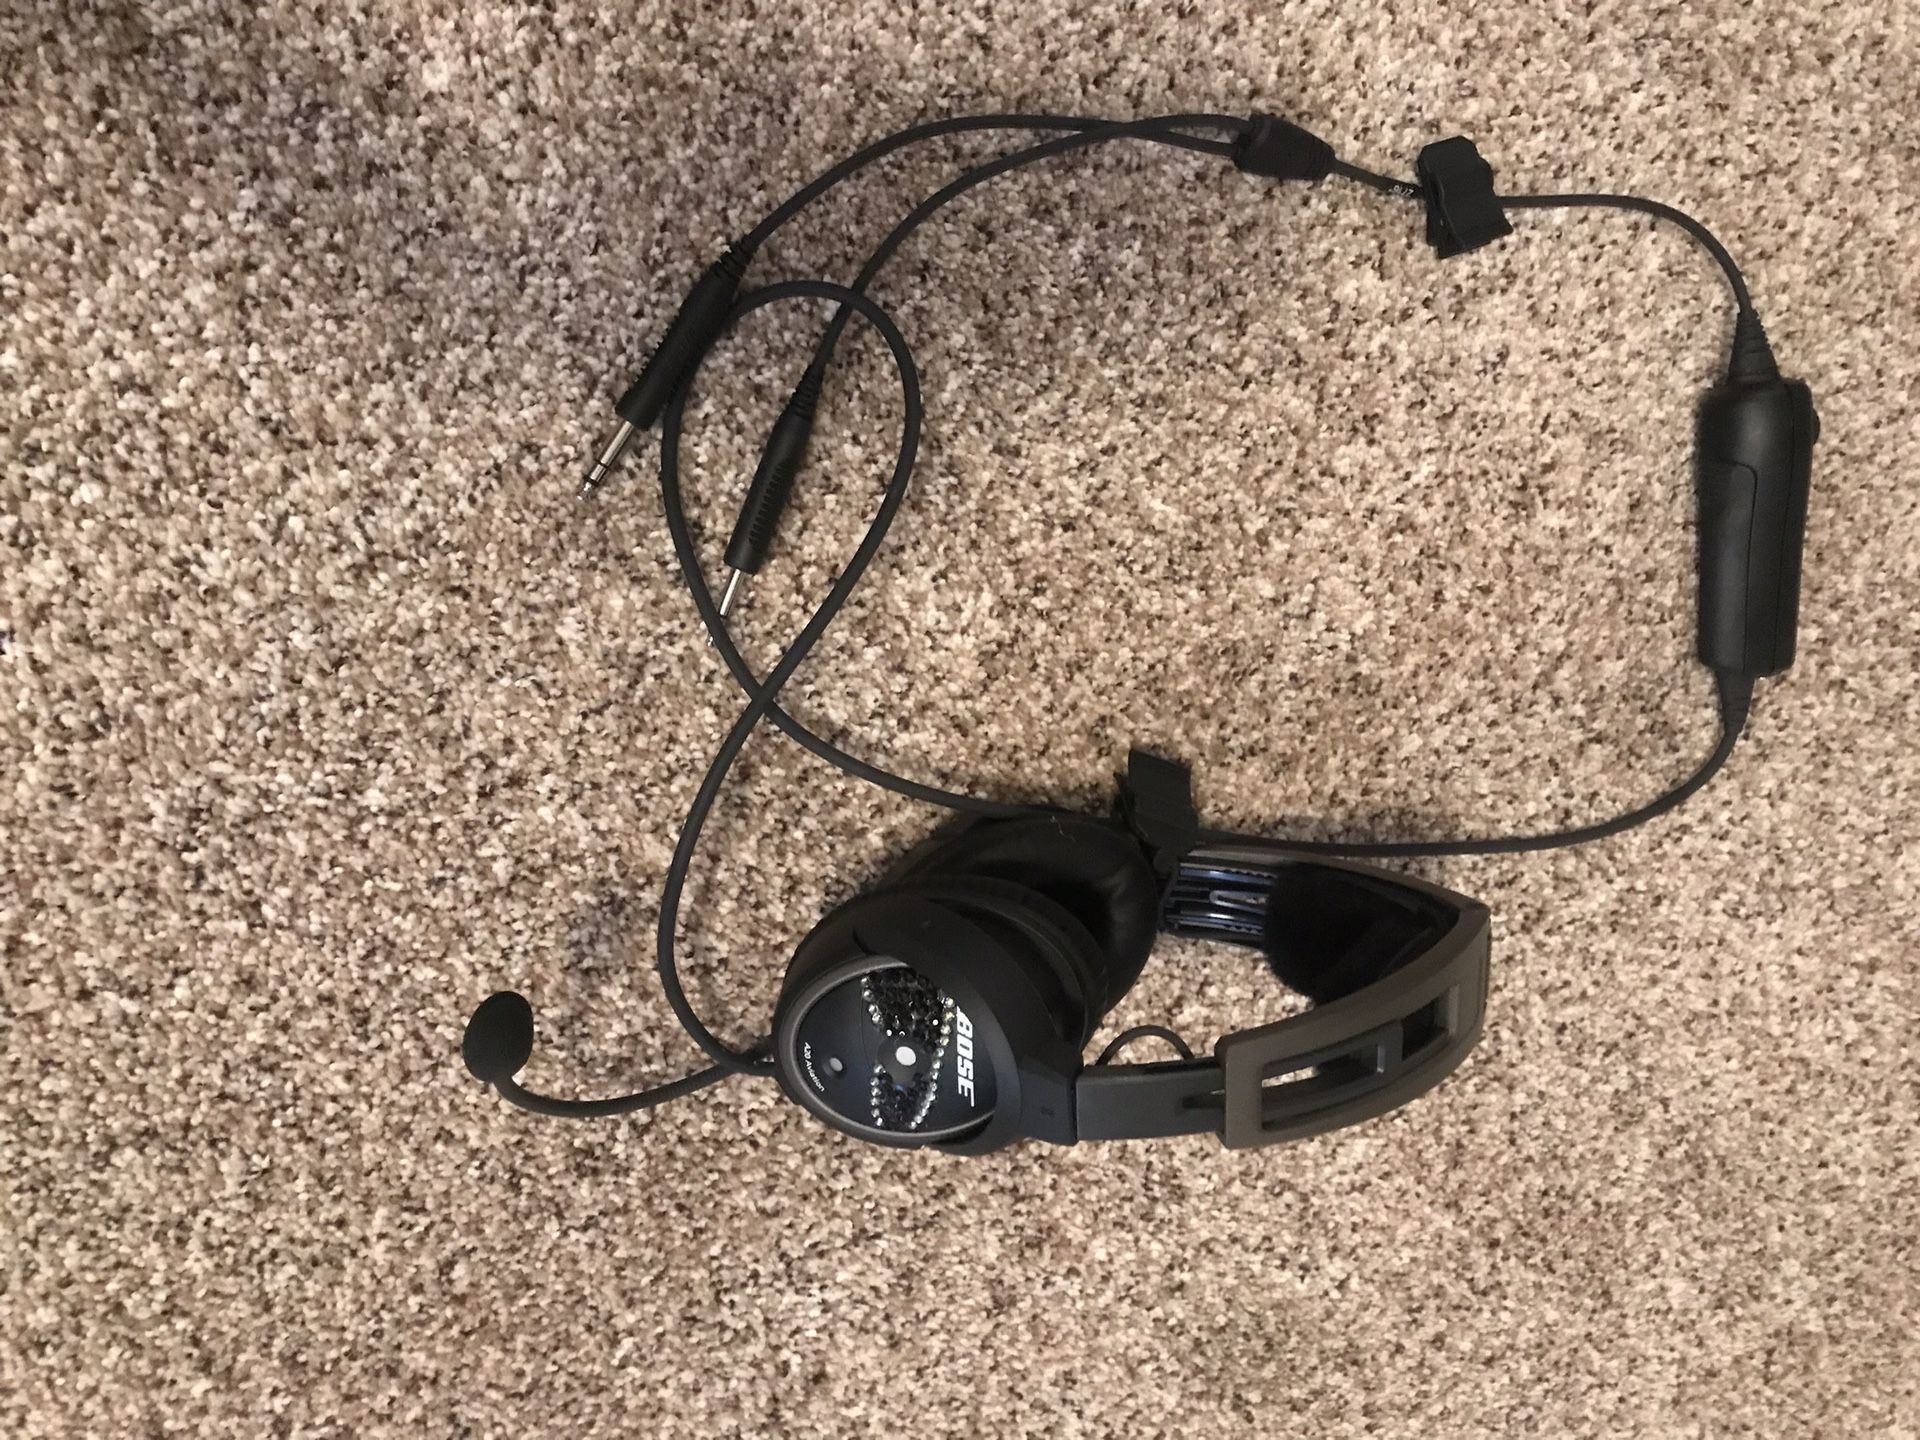 New! Used one time then sold airplane. Bose Aviation headset.